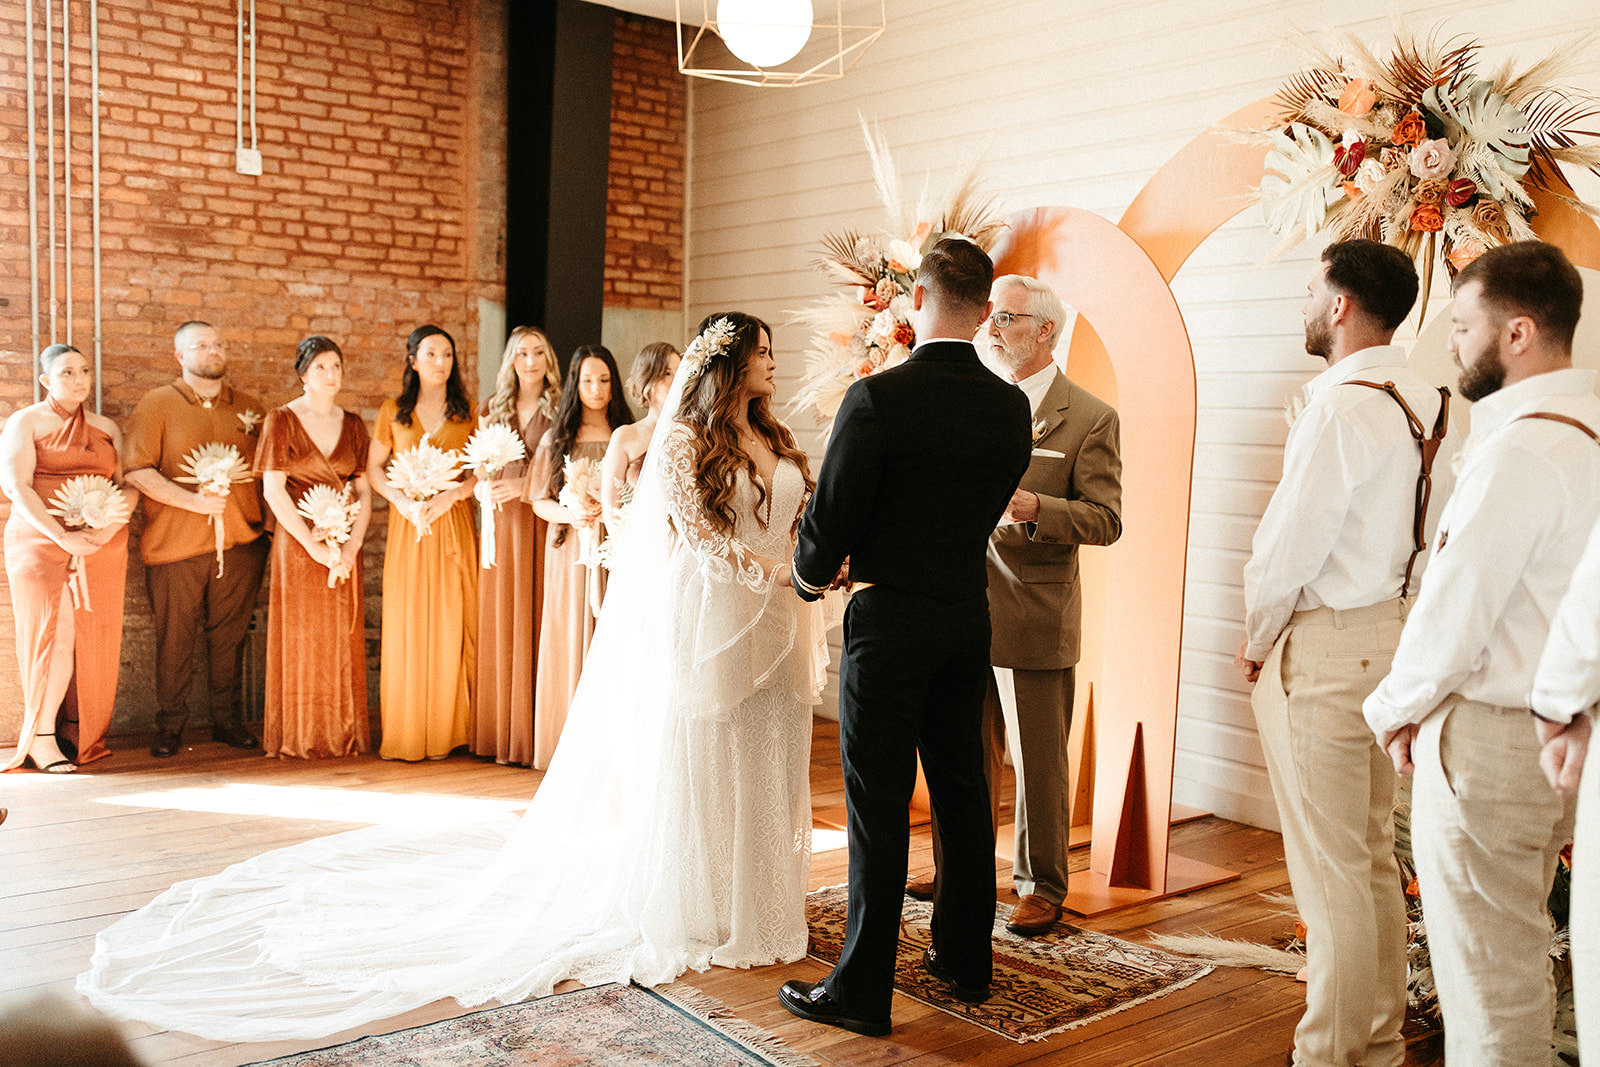 Earthy Neutral Boho Modern Chic Wedding, Bride and Groom Exchanging Wedding Vows | Tampa Bay Wedding Planner Wilder Mind Events | Wedding Florist Save the Date Florida